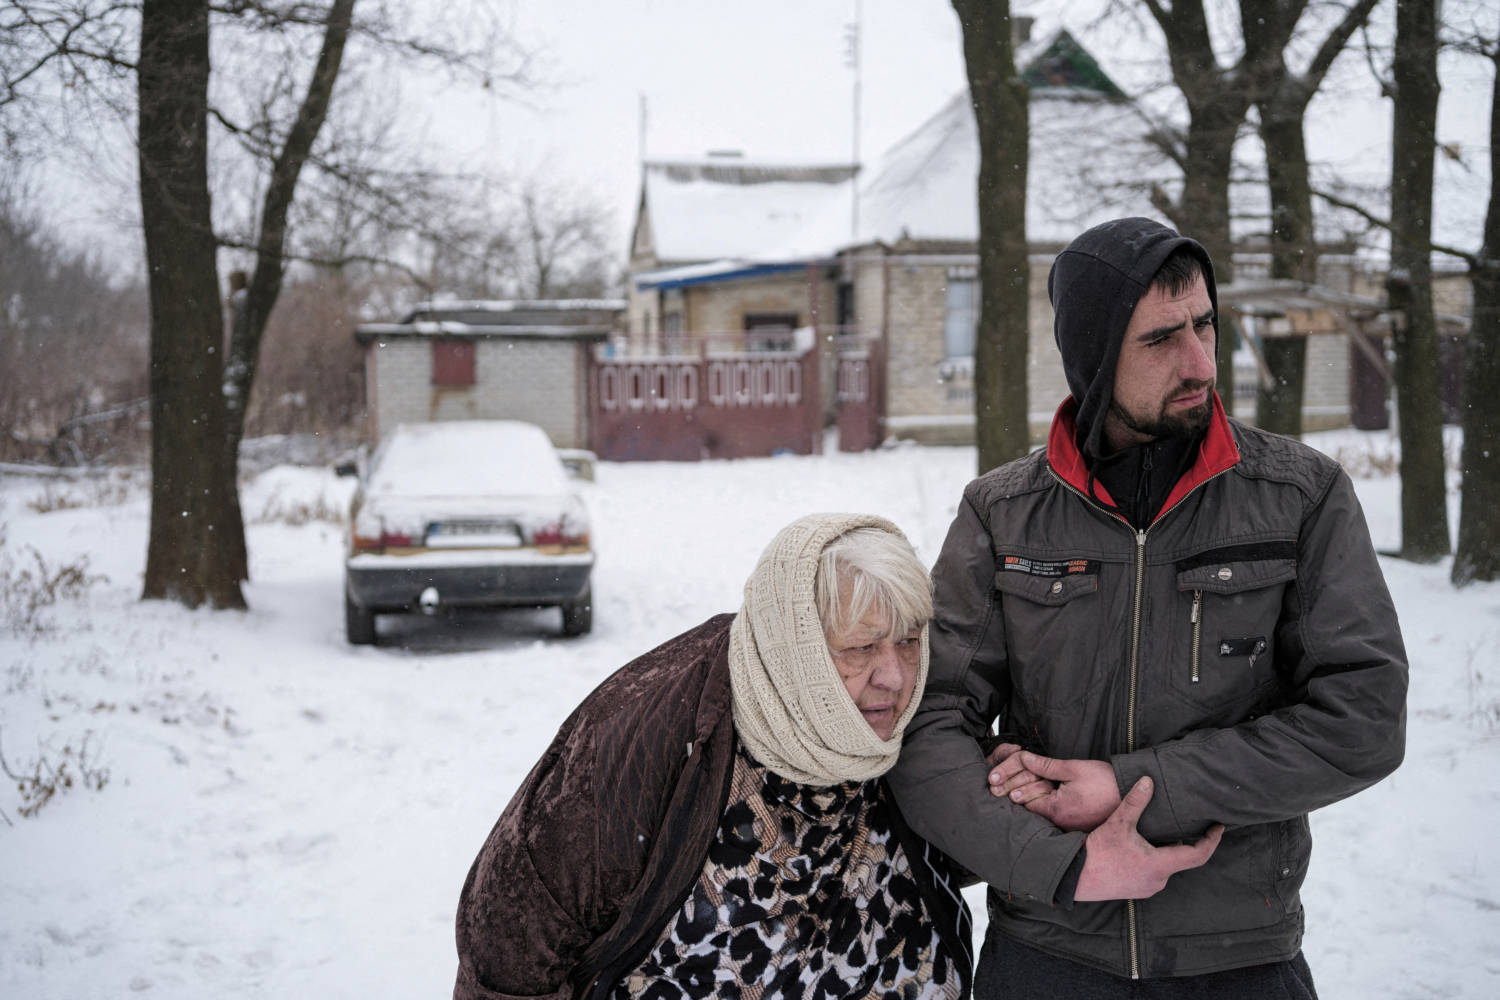 A Picture And Its Story: On The Road From Donetsk, Evacuation Ends In Heartbreak